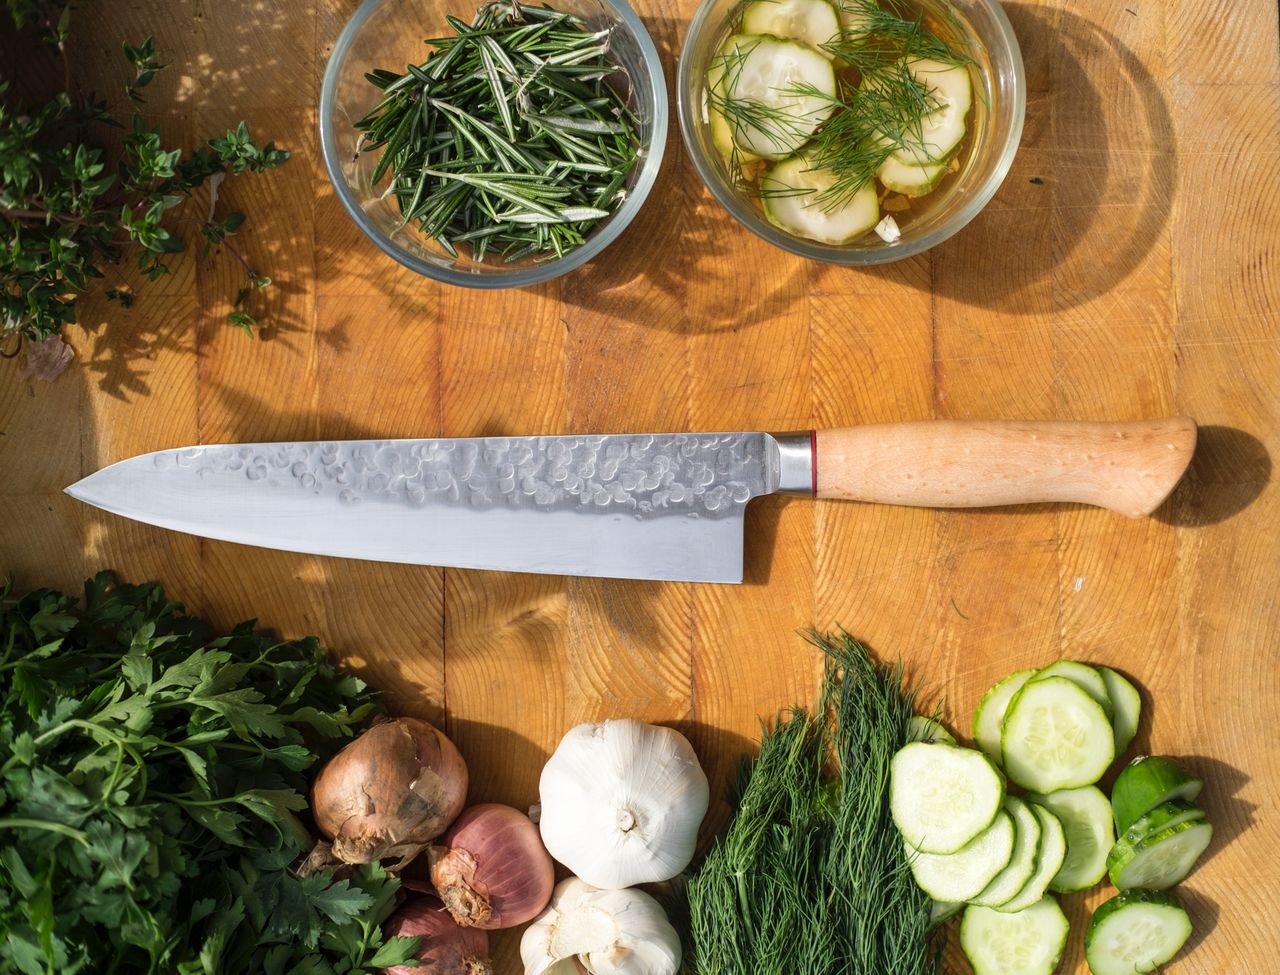 A high-quality kitchen knife is a helper for many years.